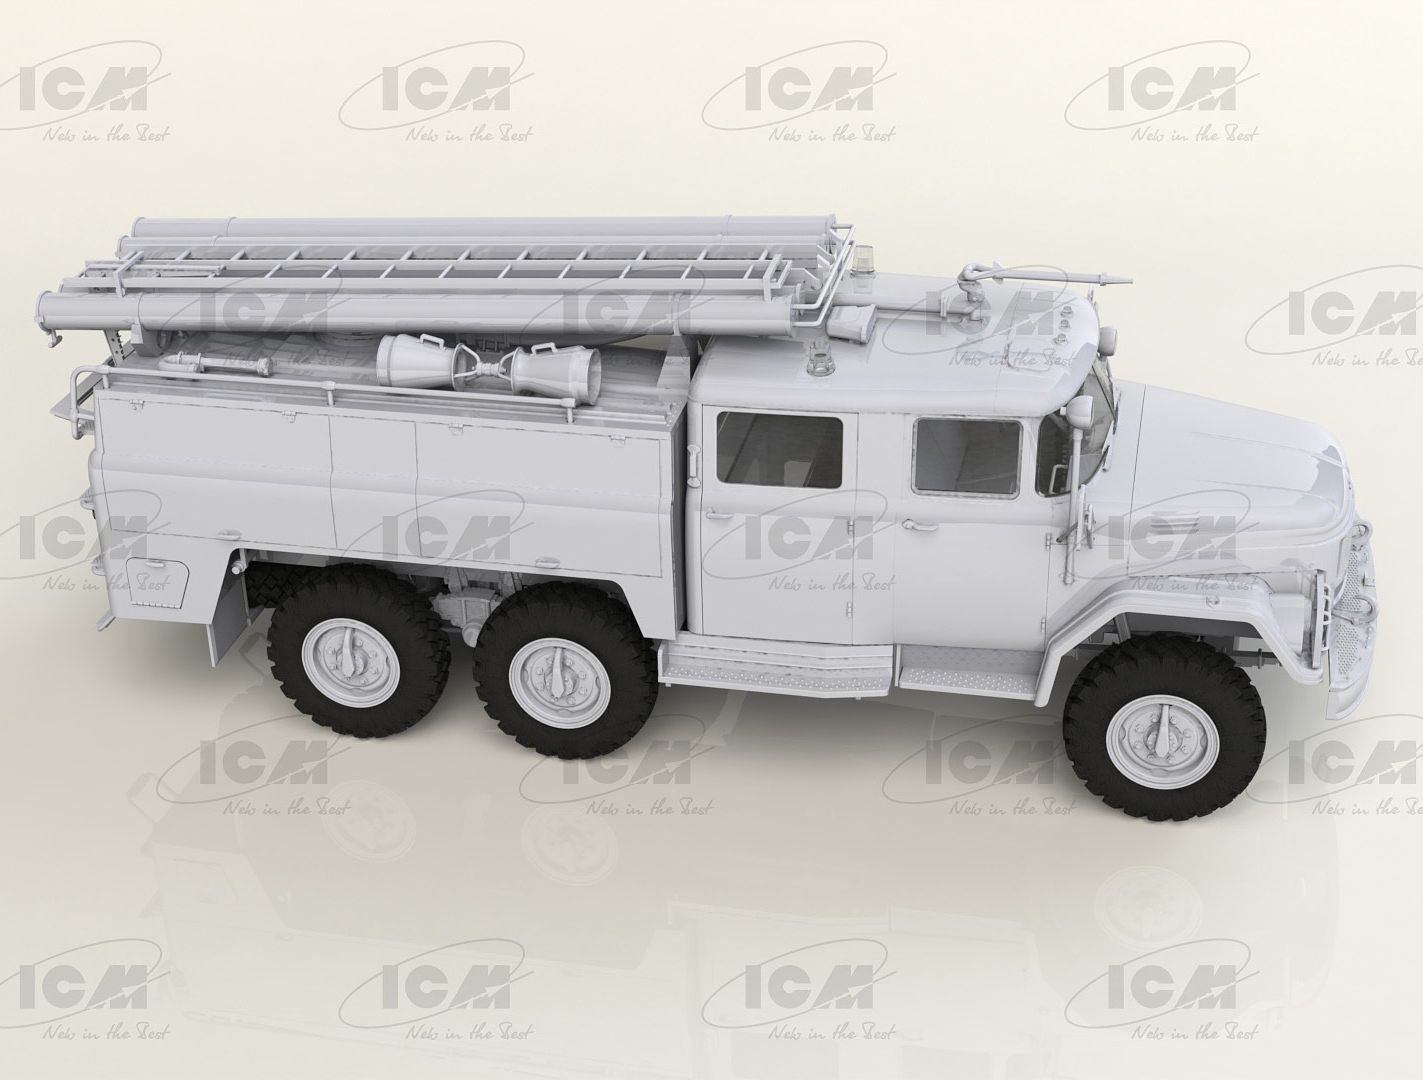 ICM 1:35 Chernobyl #2. Fire Fighters (AC-40-137A Firetruck & 4 Figures & Diorama Base with Background)